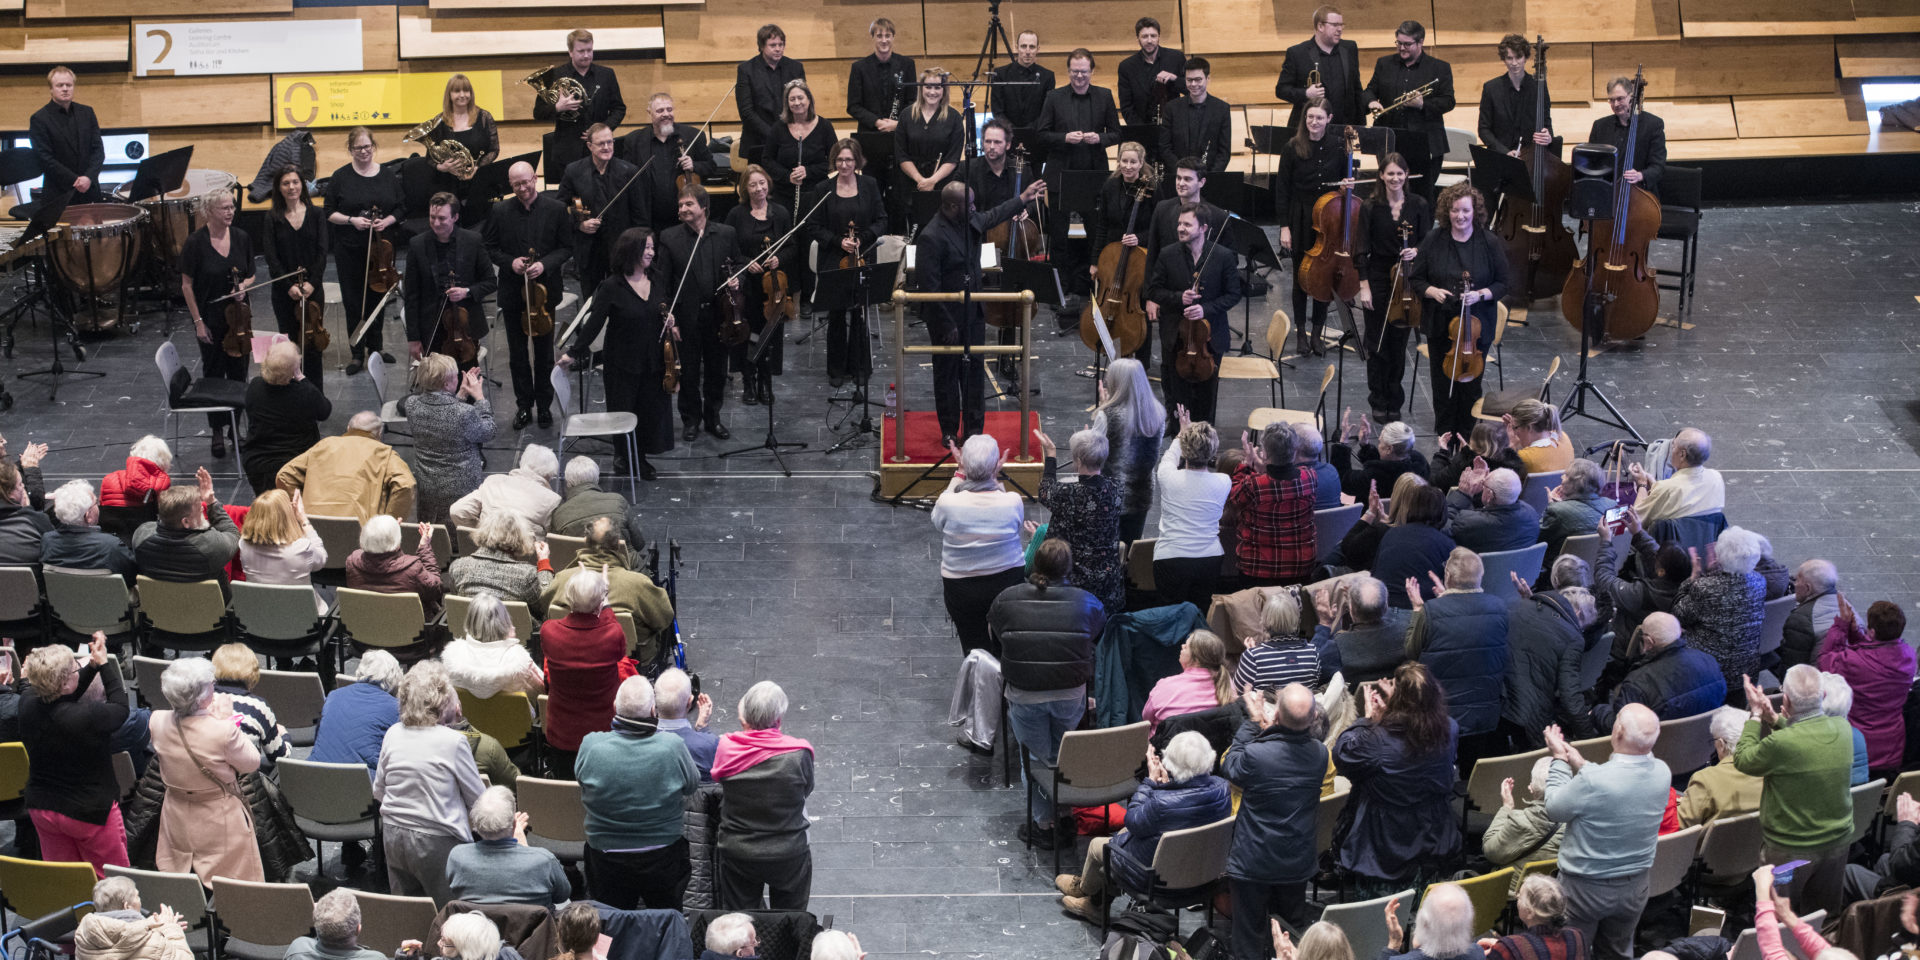 RSNO host free dementia friendly concert at V&A Dundee